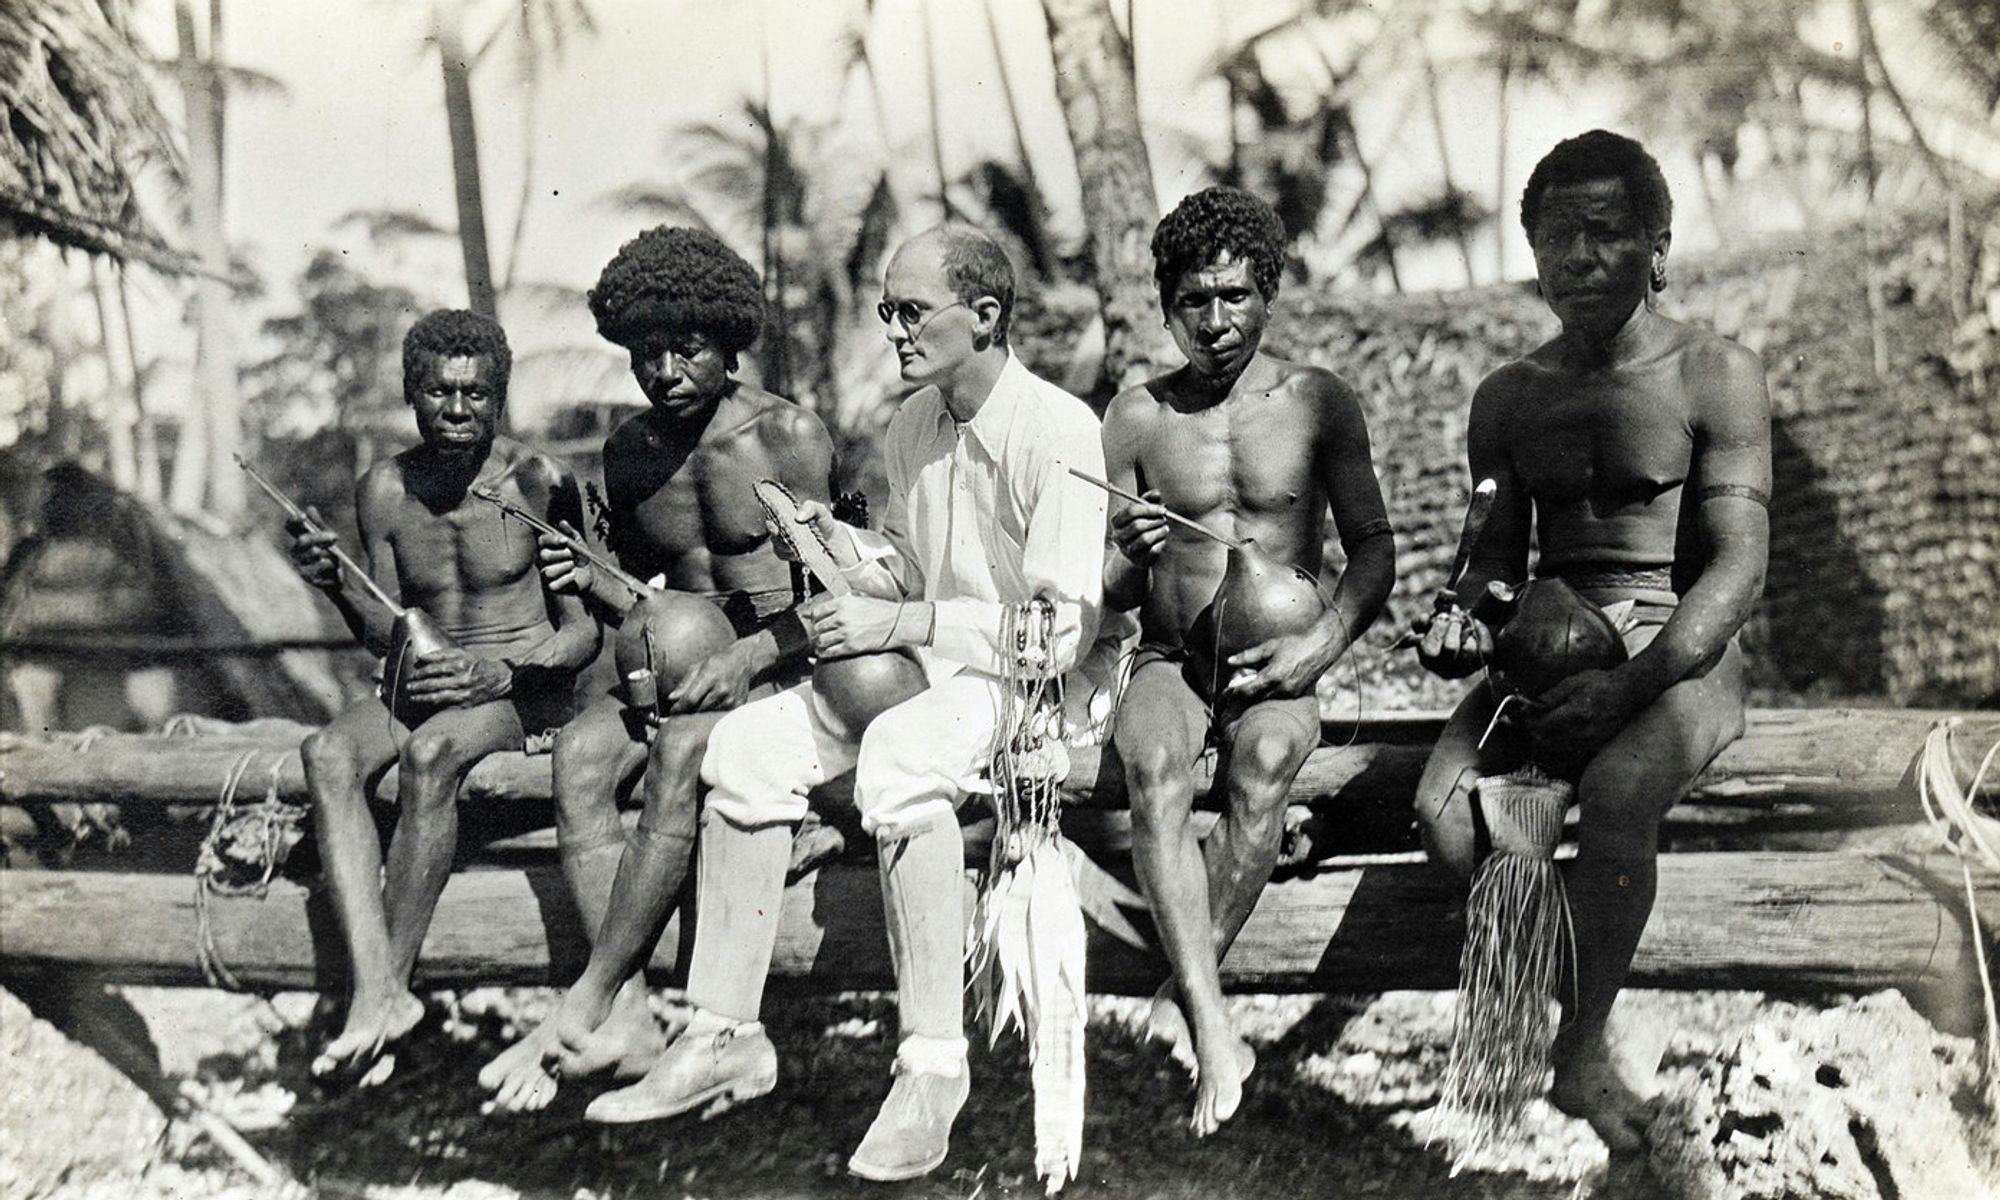 LaBiennale:Bronisław Malinowski anthropologist with the Indigenous people of the Trobriand Islands. Photographed in 1918.